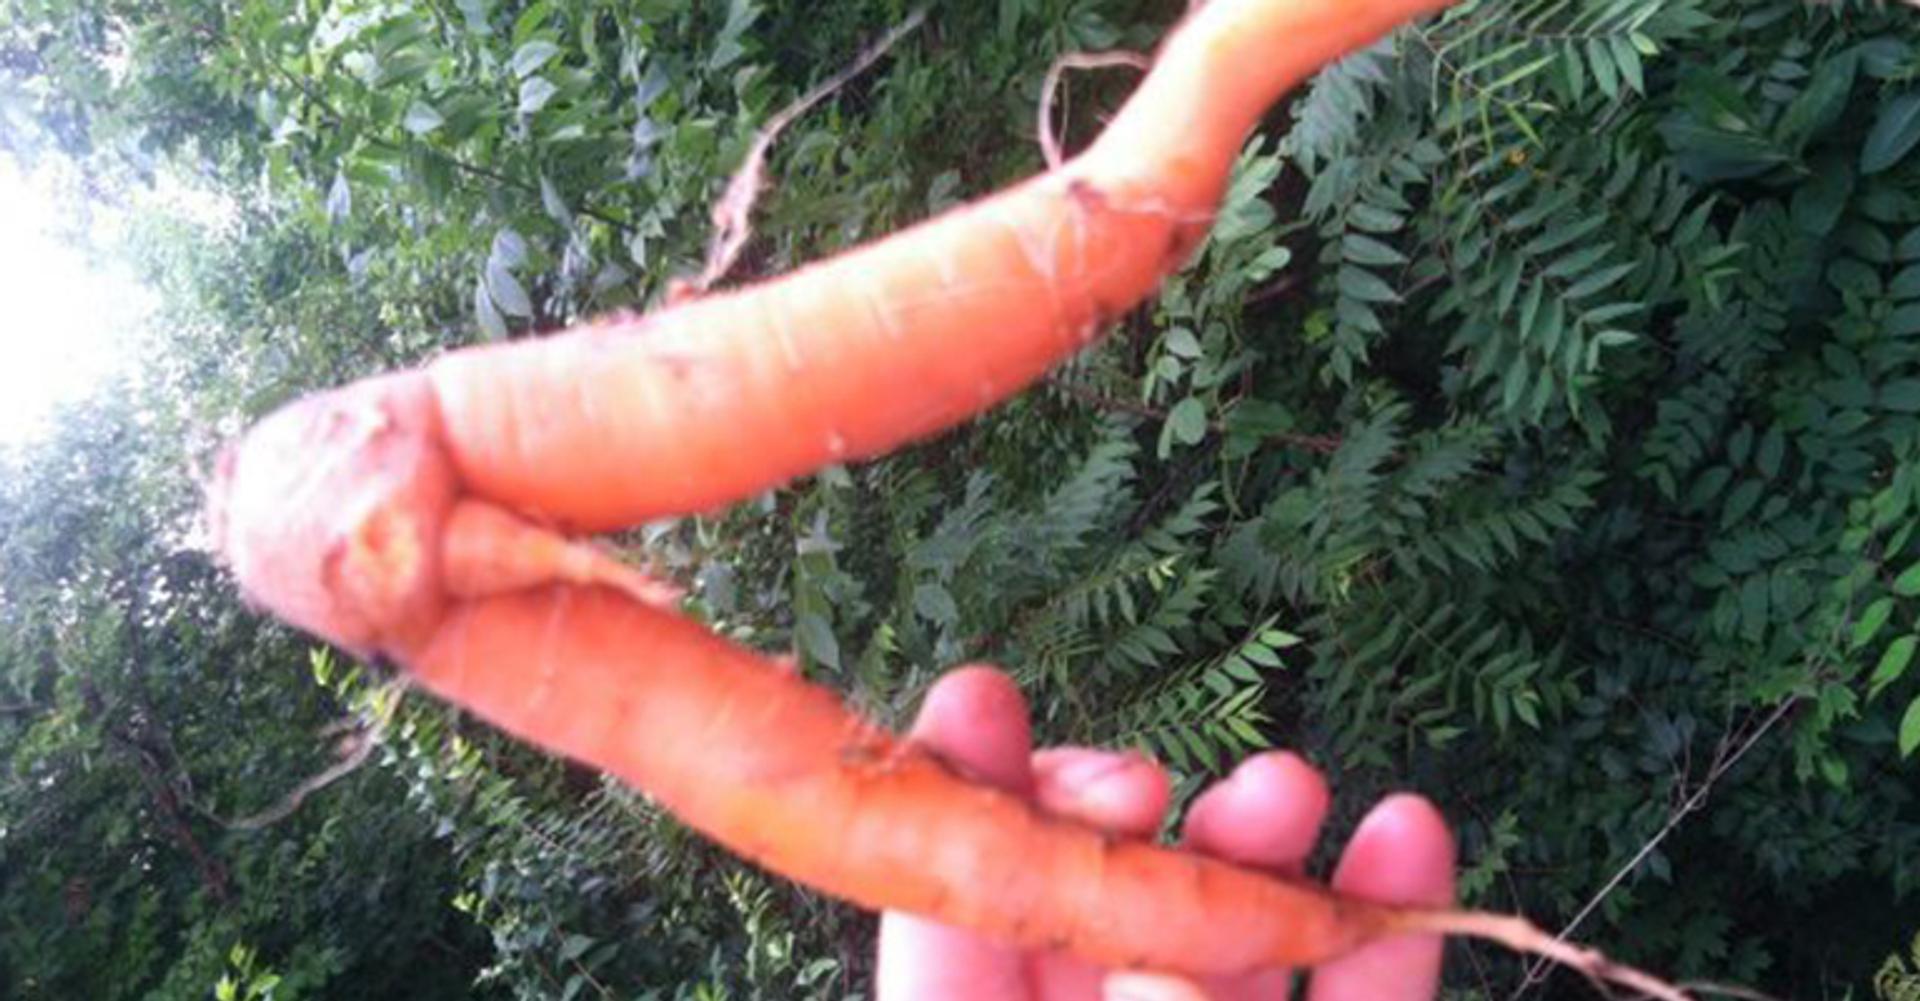 A blurry image of a carrot that looks like two legs with male genitalia. 